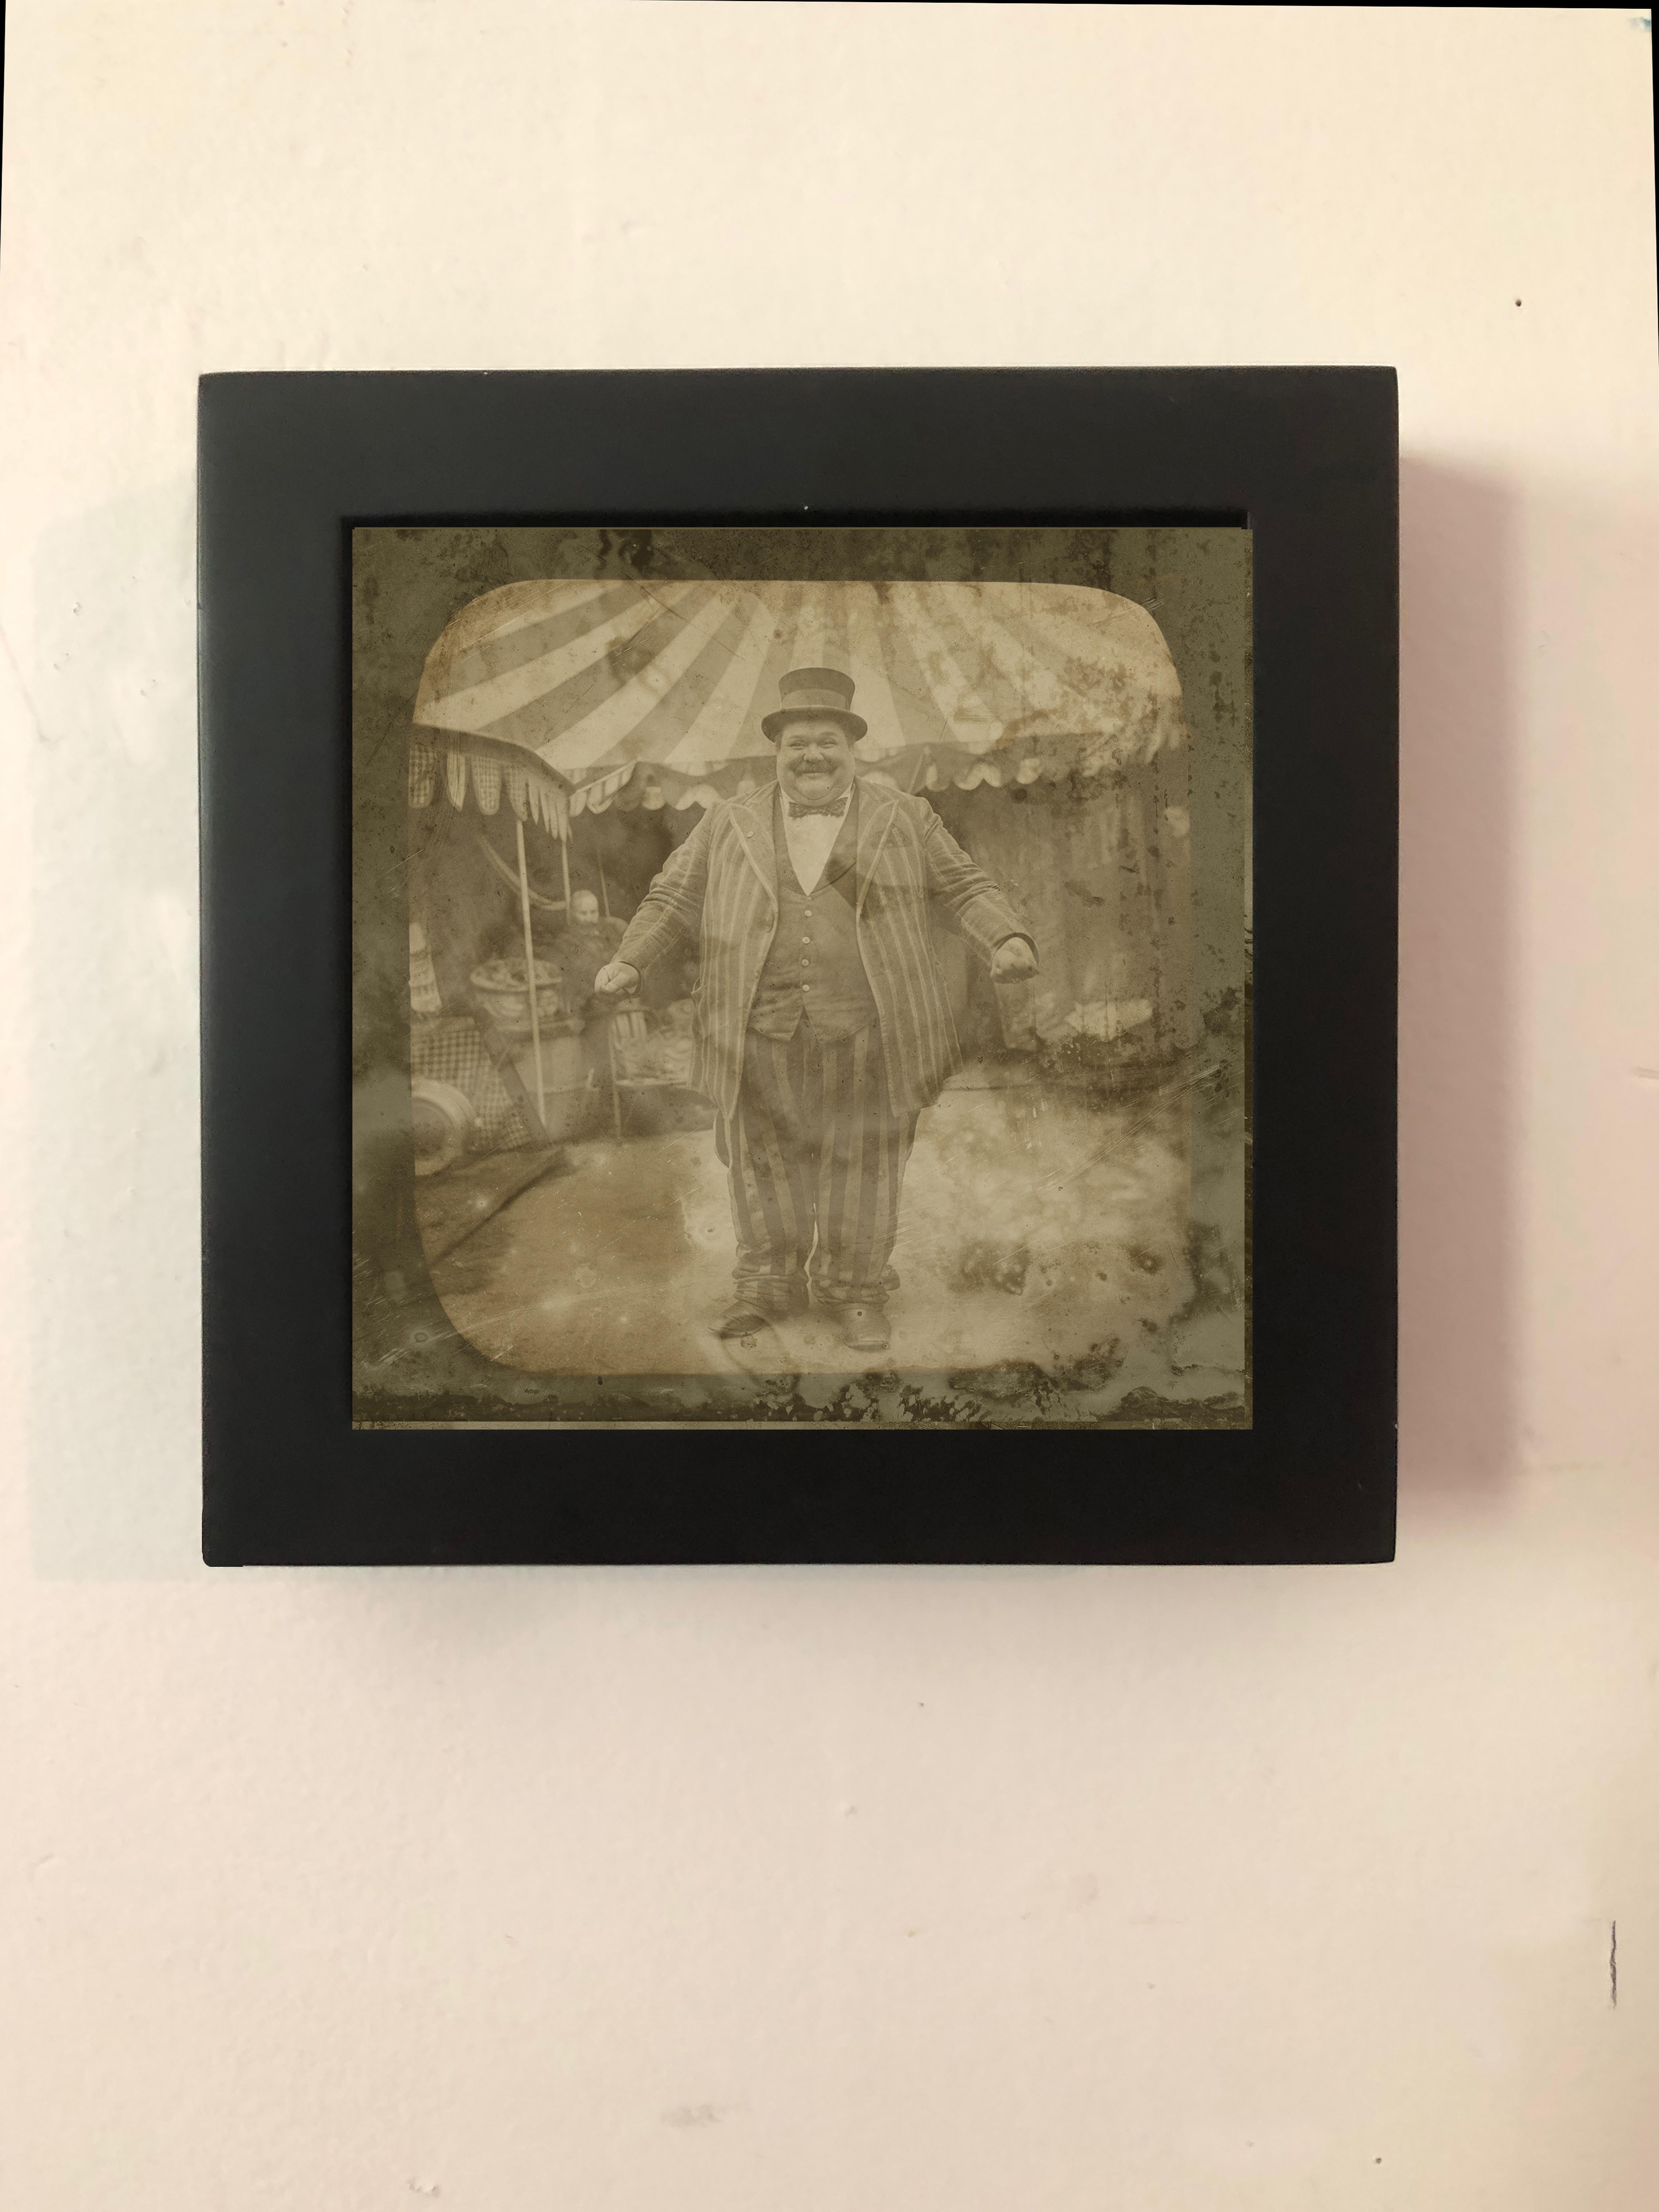 Circus Fatman -exotic daguerreotype reproduction Framed - Photograph by FPA Francis Pavy Artist